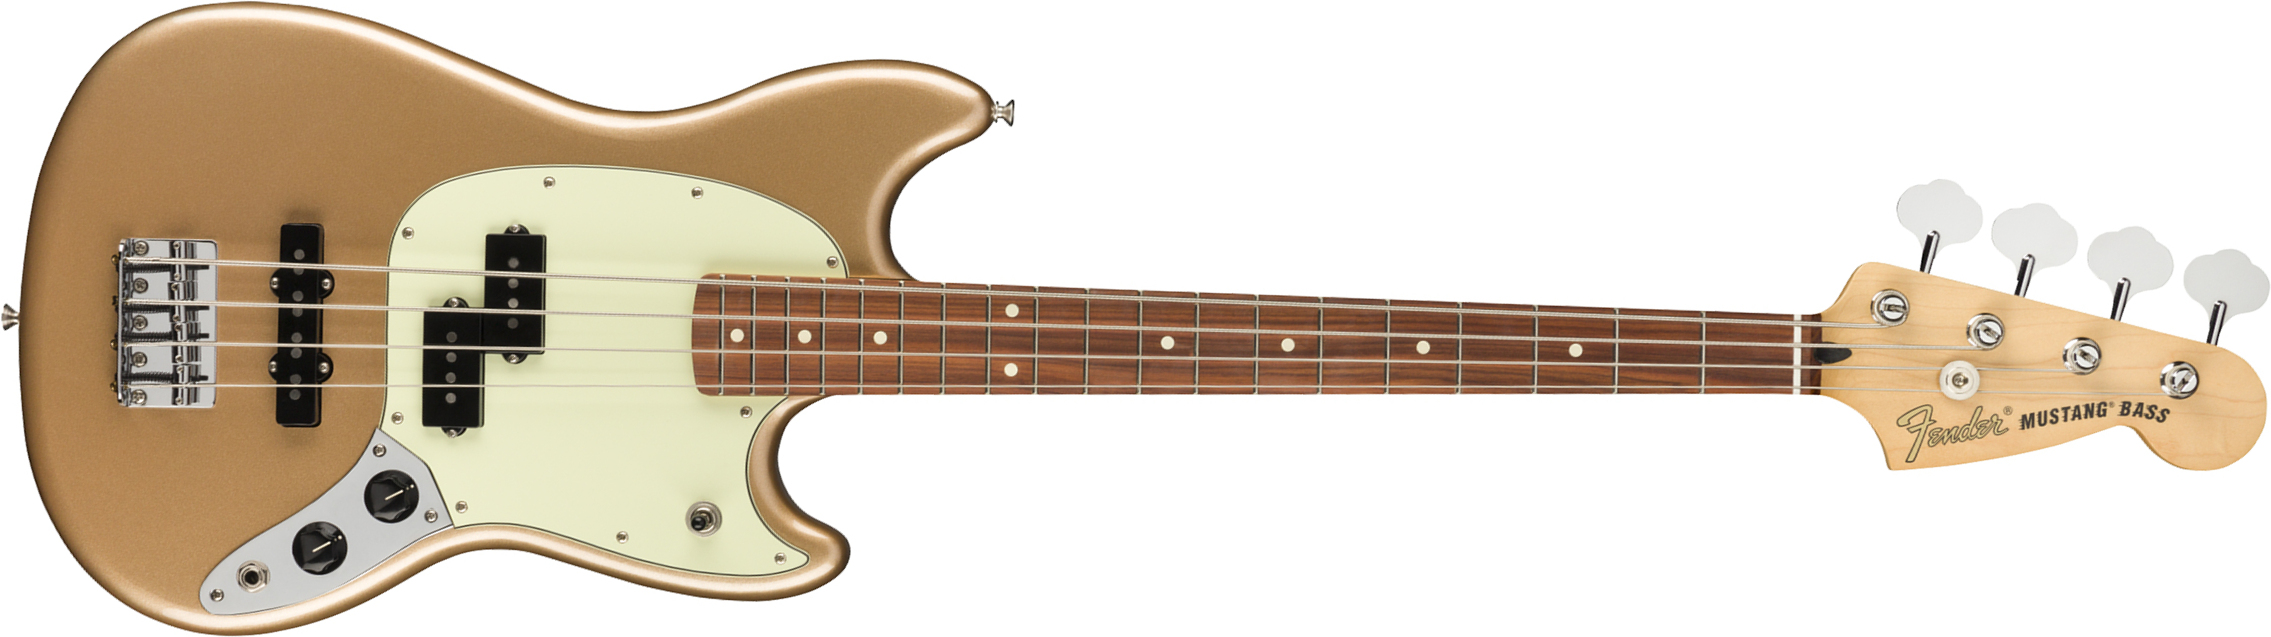 Fender Player Mustang Bass Mex Pf - Firemist Gold - Bajo eléctrico para niños - Main picture